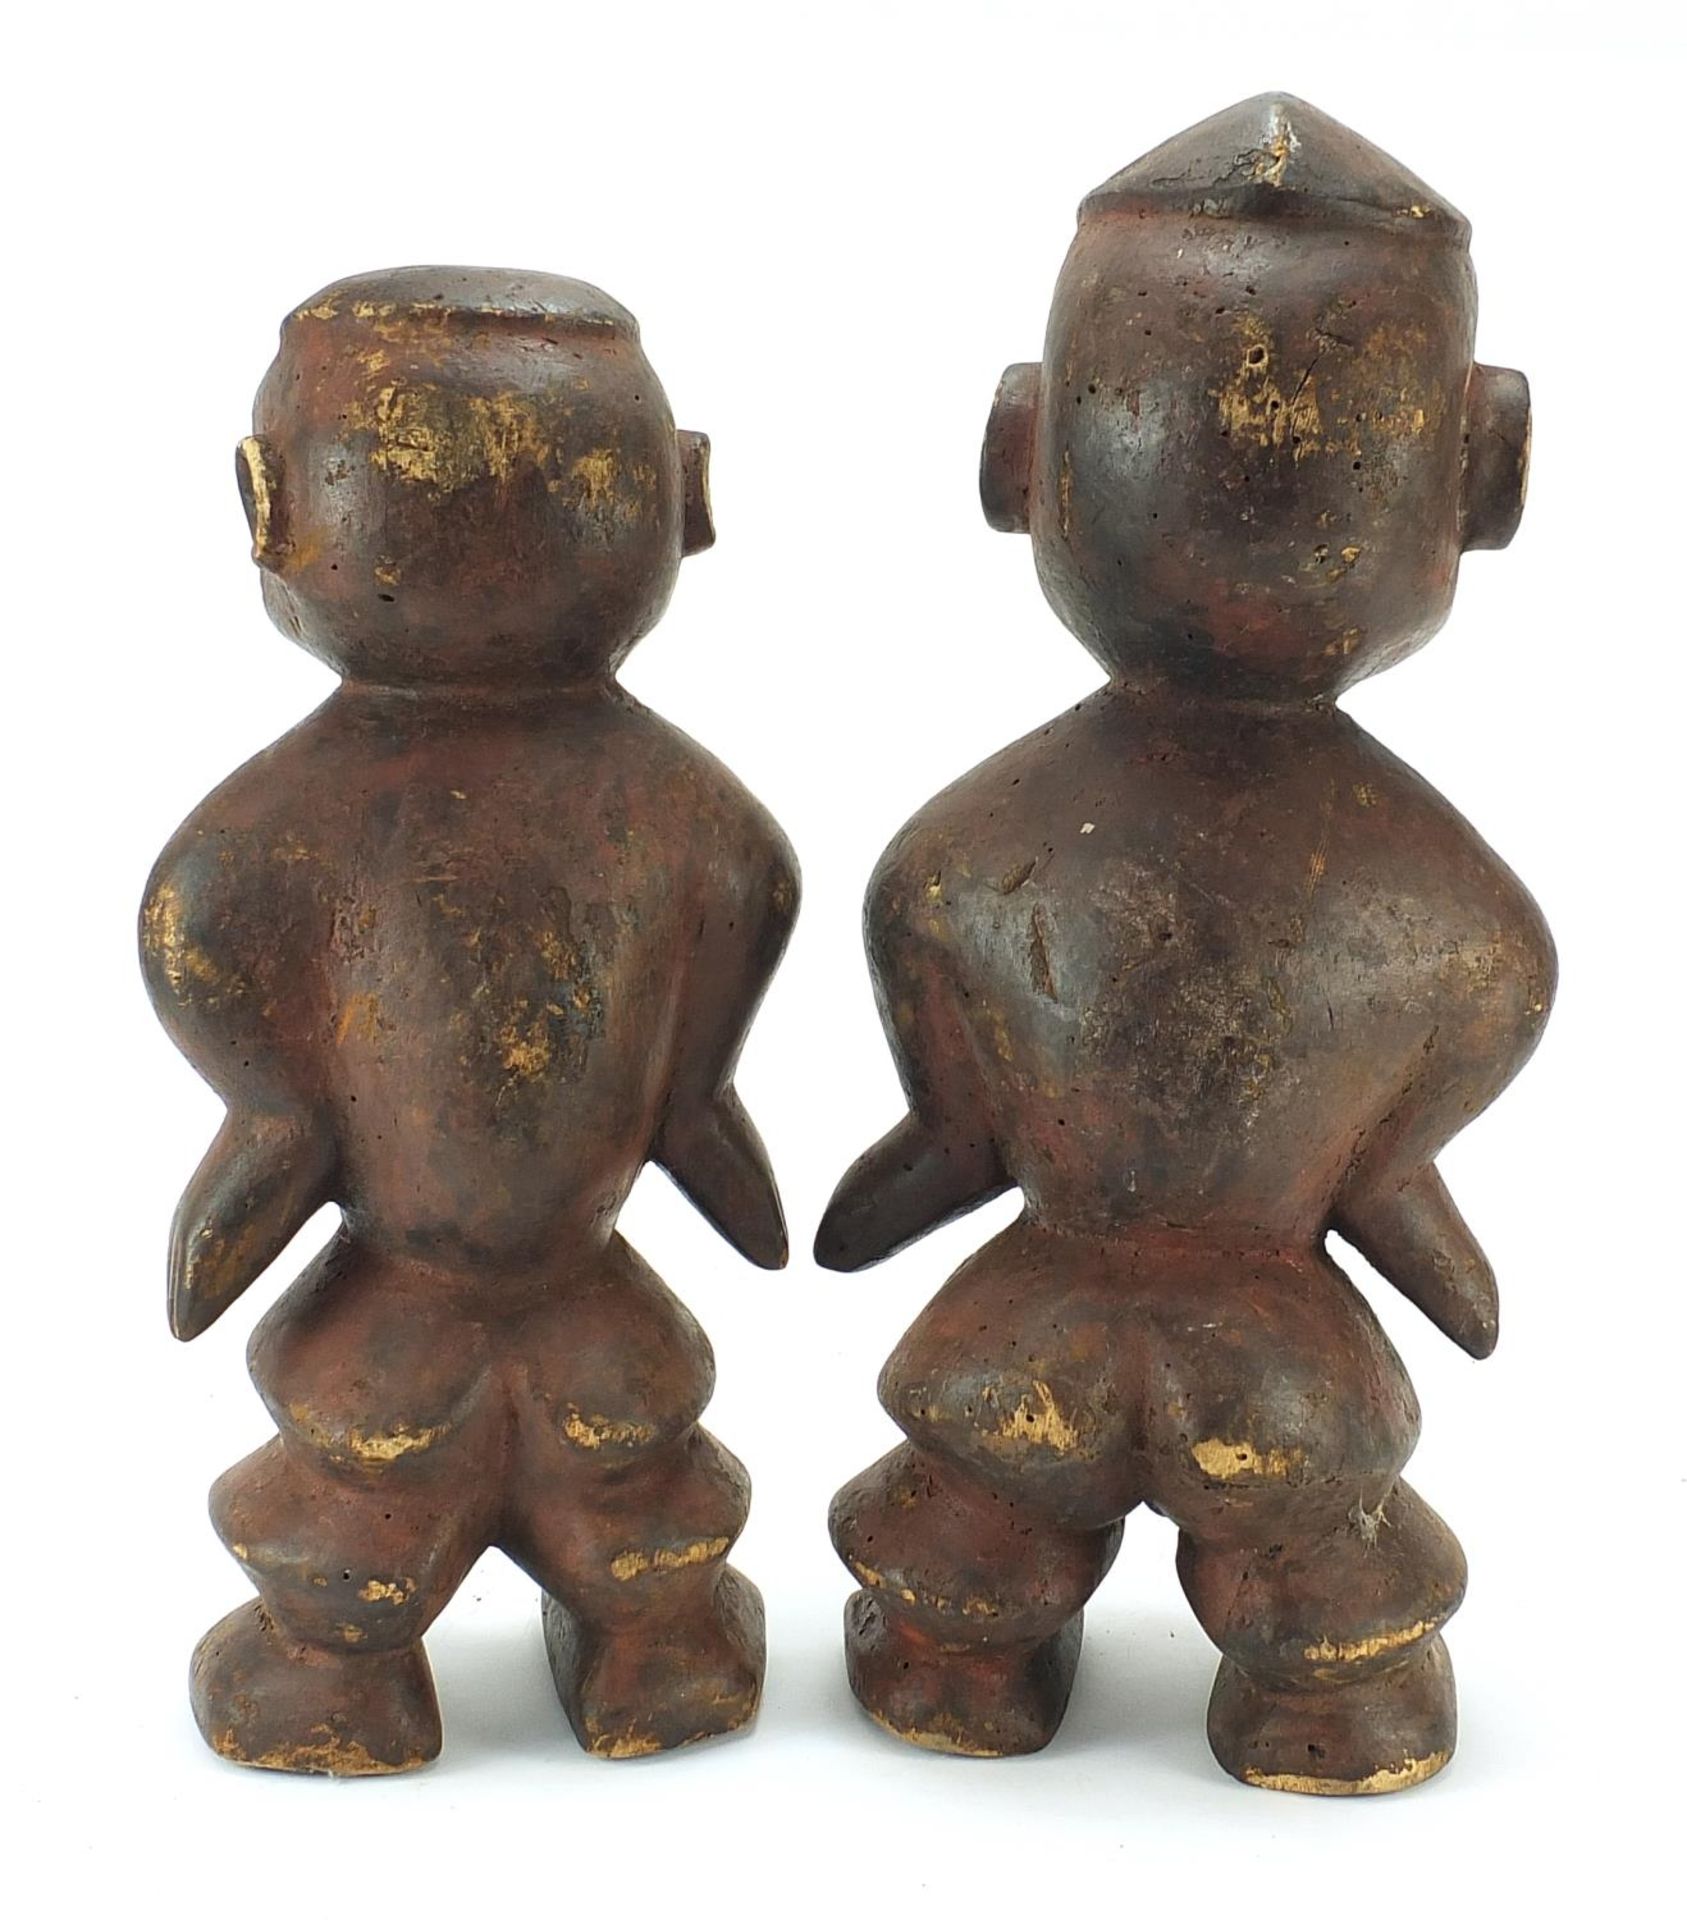 Pair of tribal interest carved hardwood fertility figures, the largest 50cm high - Image 2 of 3